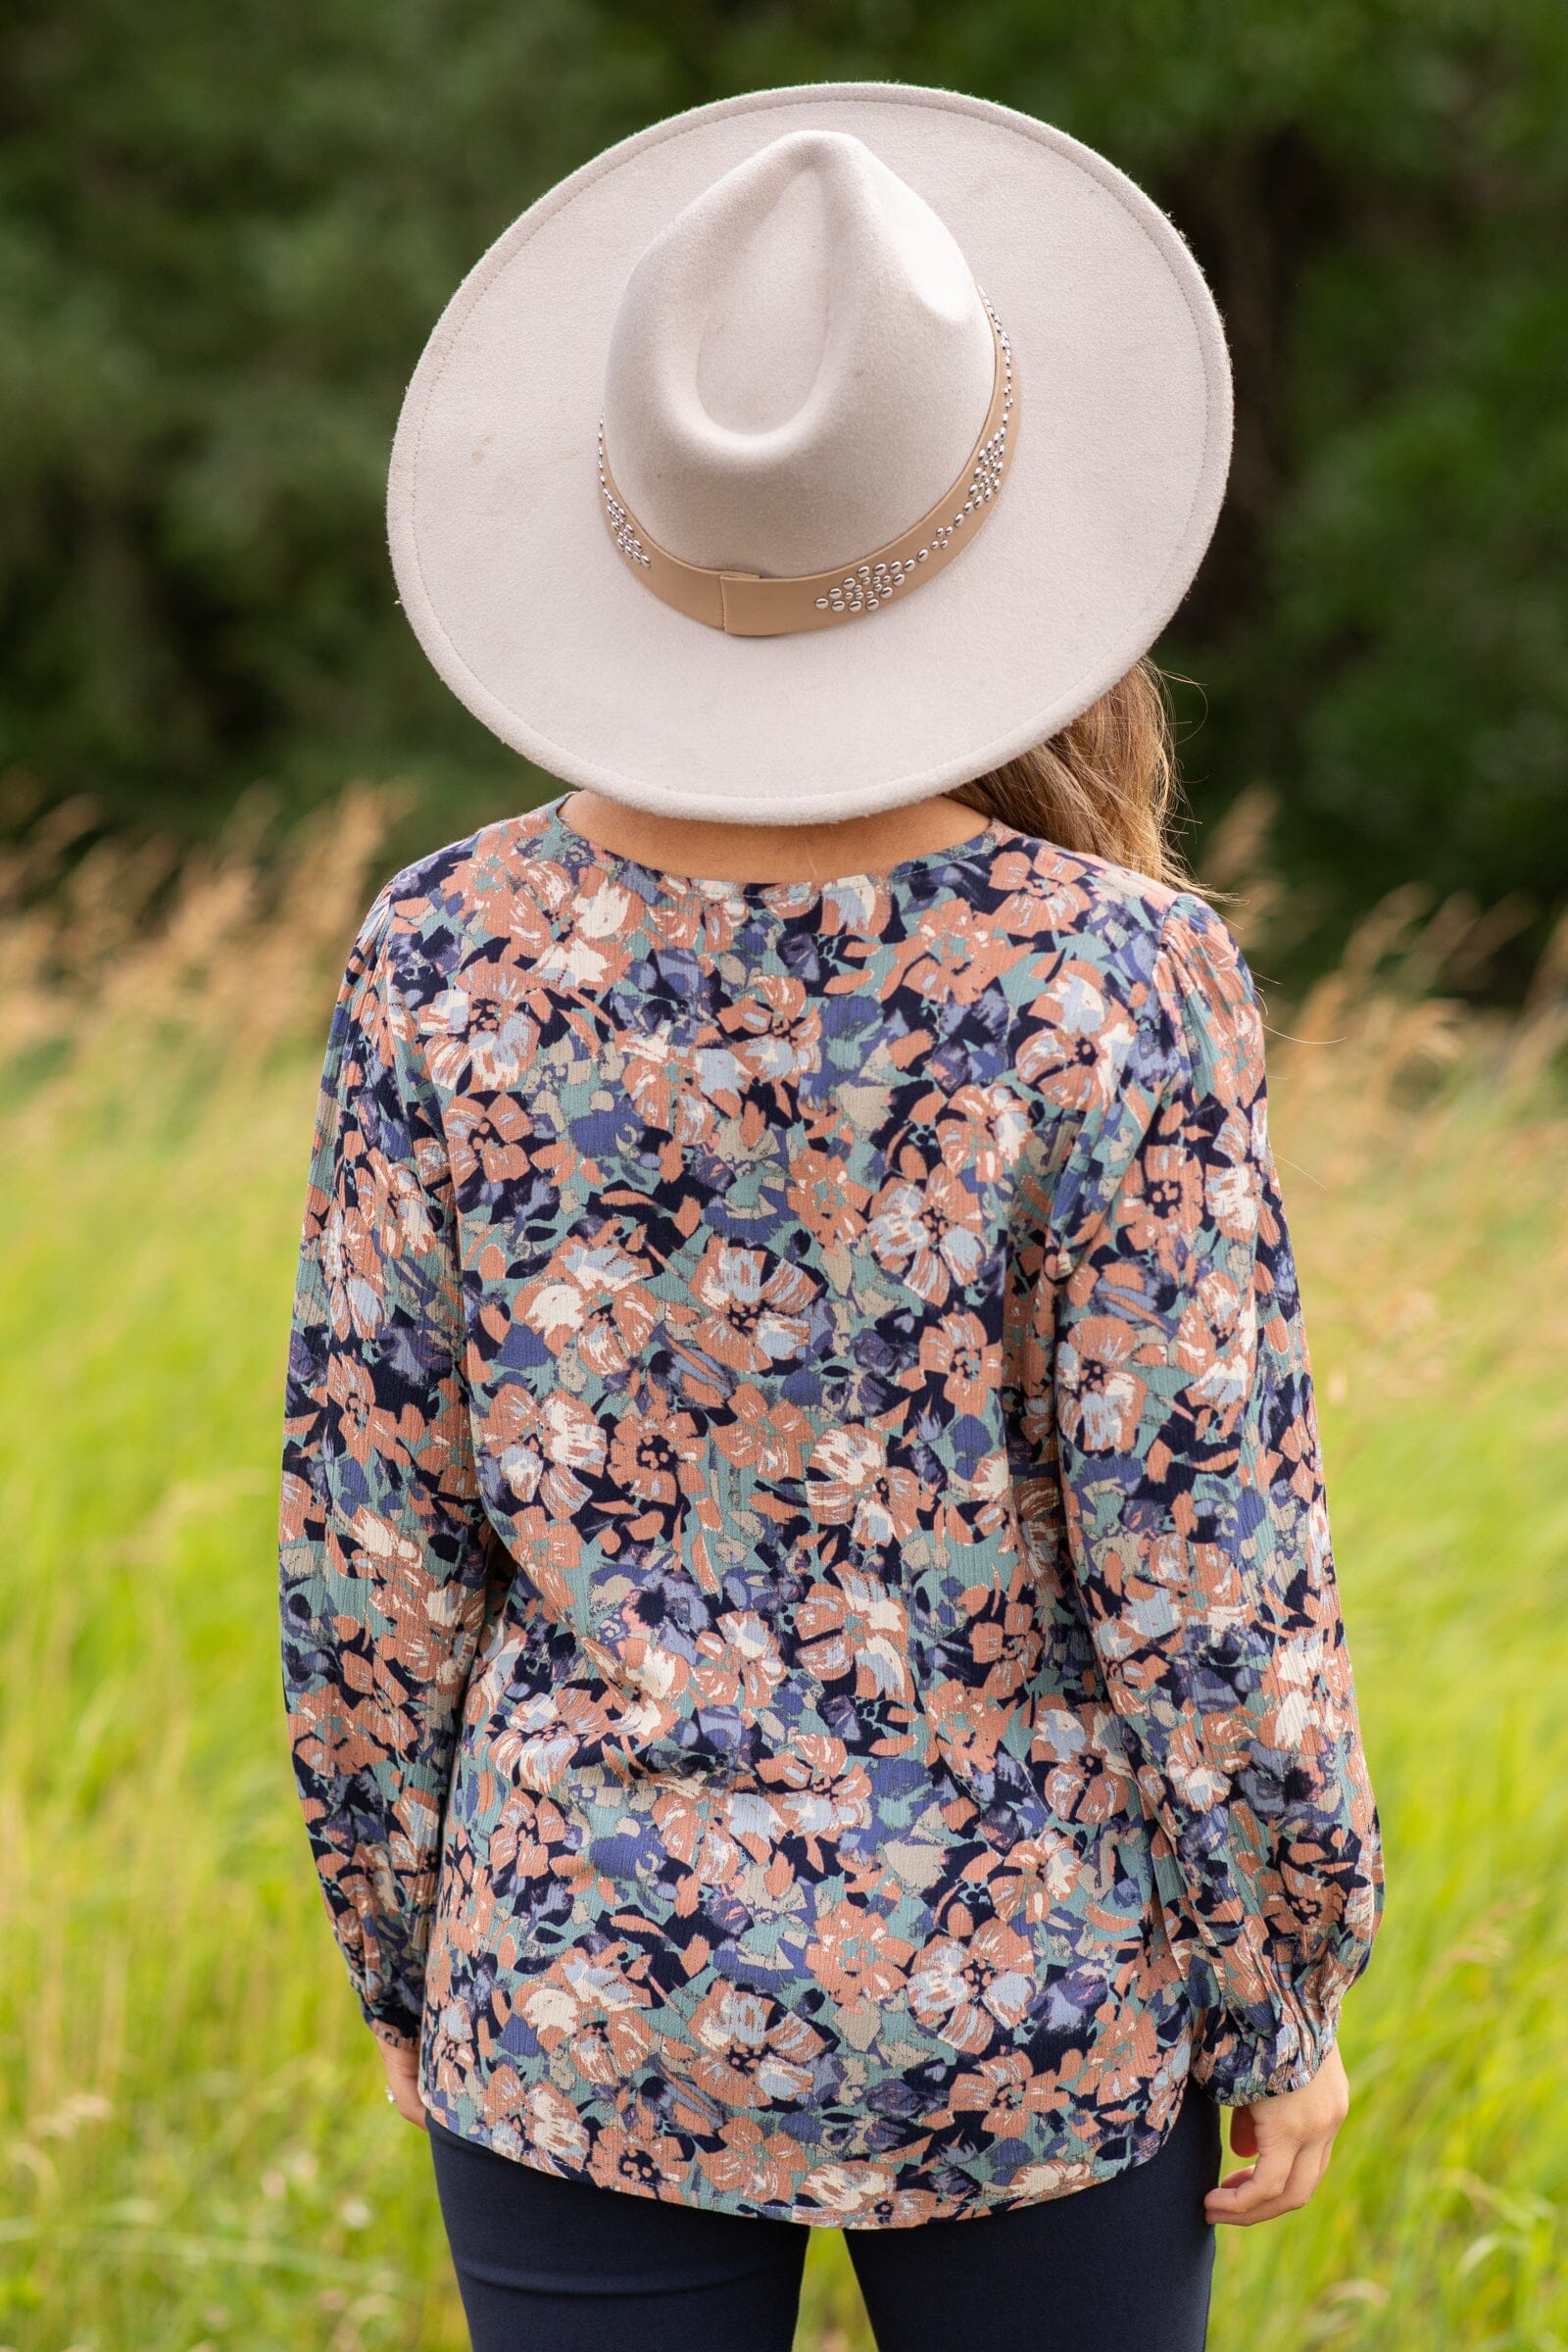 Chestnut and Navy Floral Print Long Sleeve Top - Filly Flair